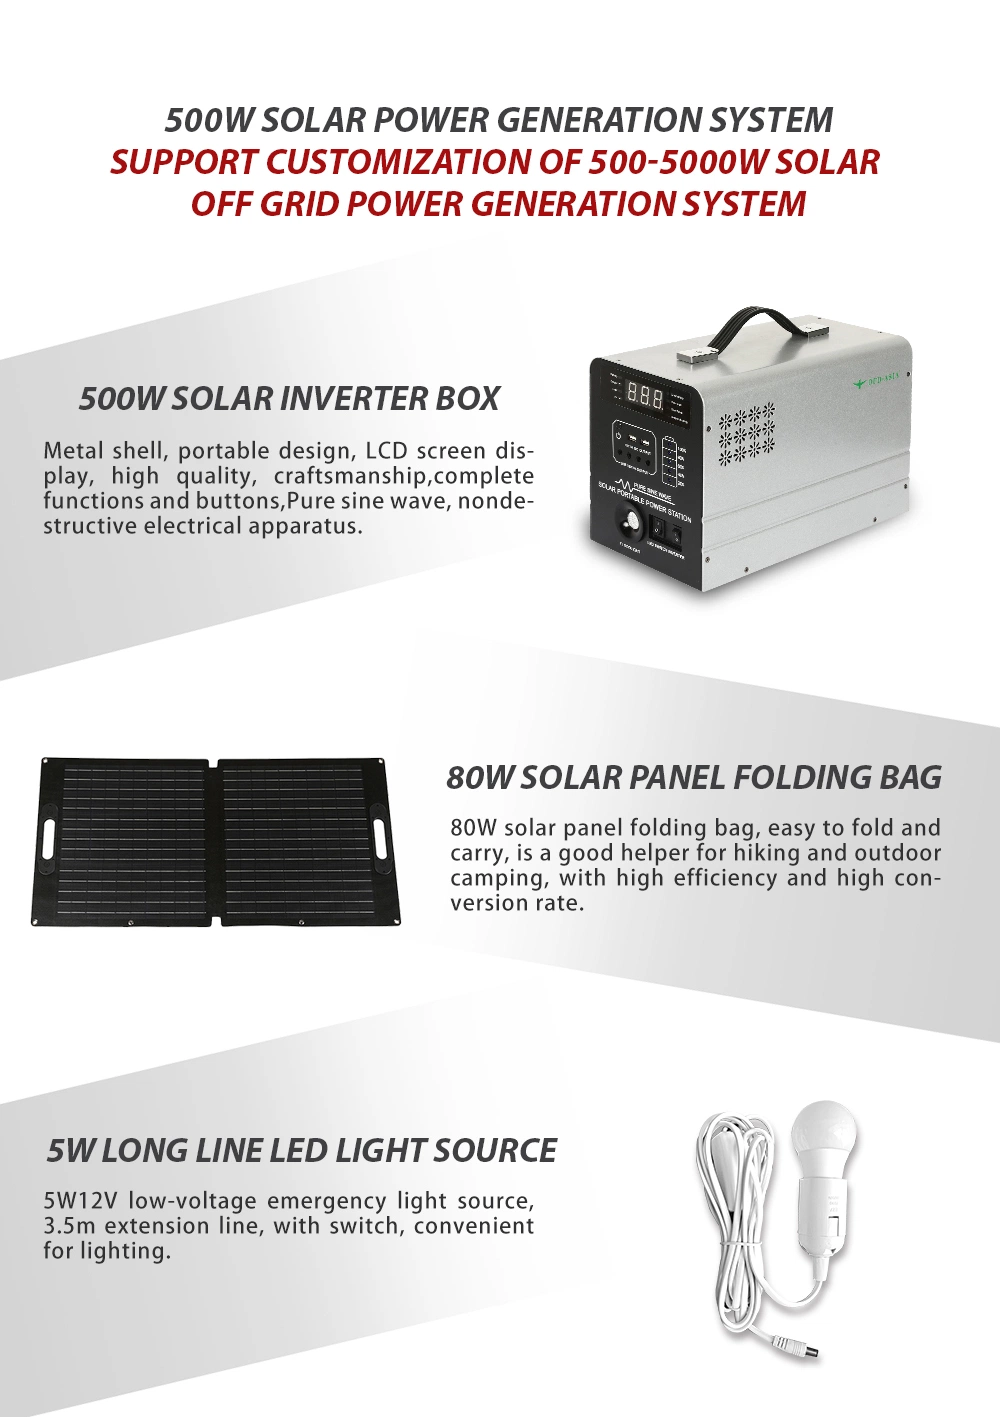 500W 2kw 3kw 4kw 5kw High Efficiency Home Solar Power 220V/100V LiFePO4 Battery Power Bank with Best Price for Solar Energy Storage Electronic Devices